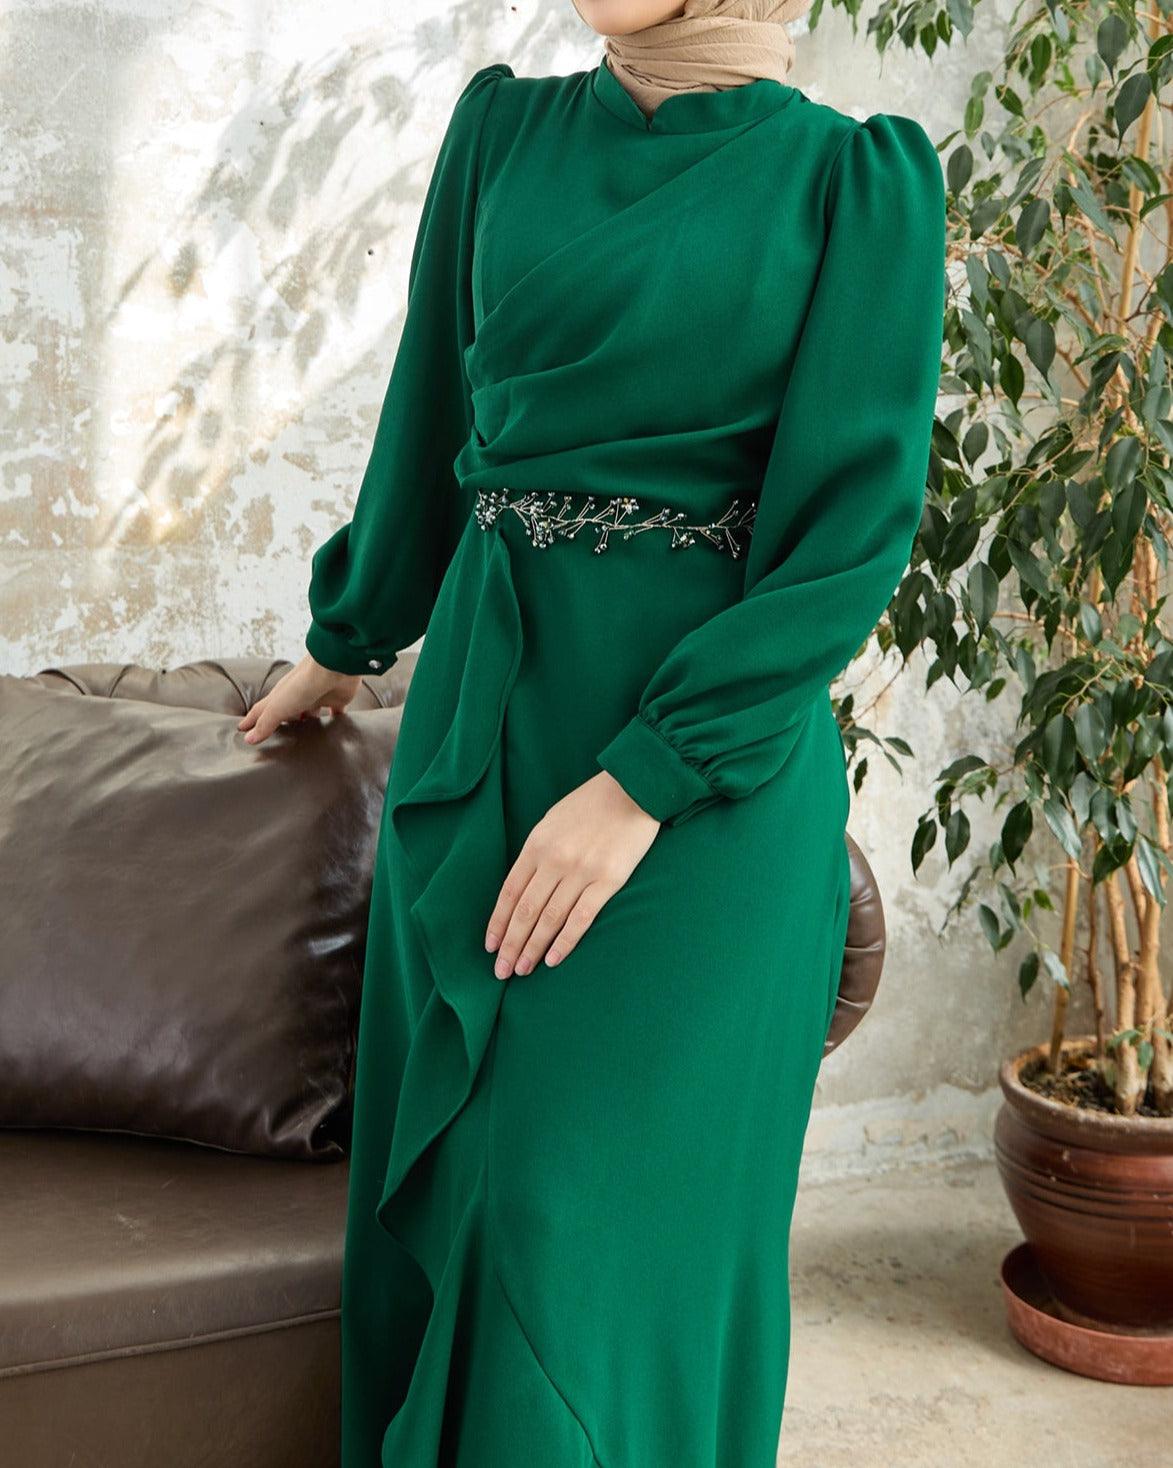 Green Flared modest evening dress - Try Modest Limited 